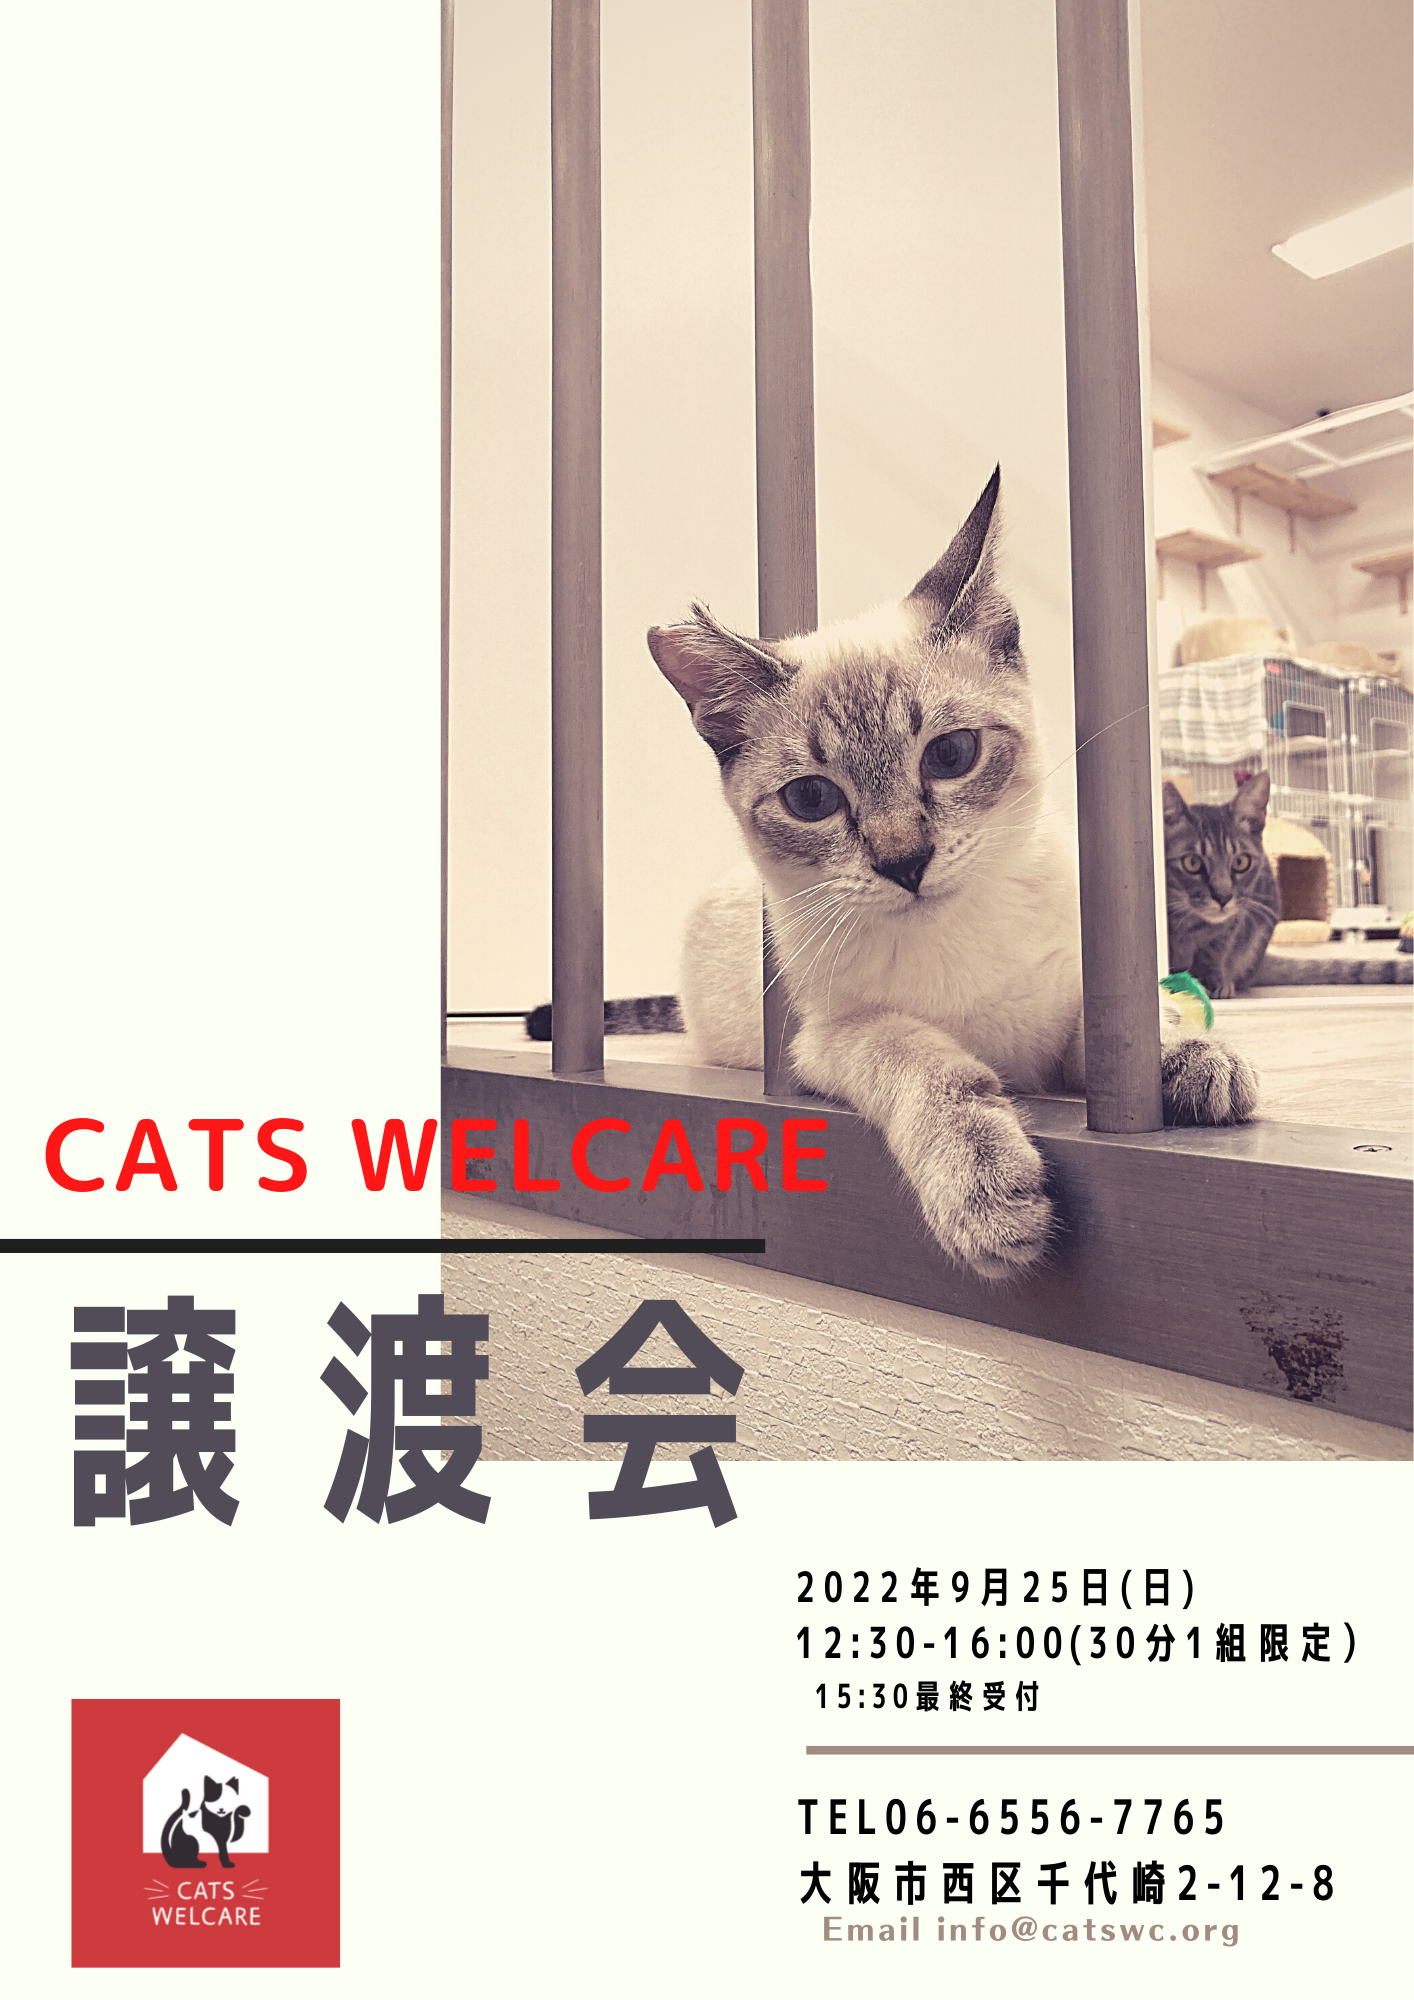 CATS WELCARE譲渡会